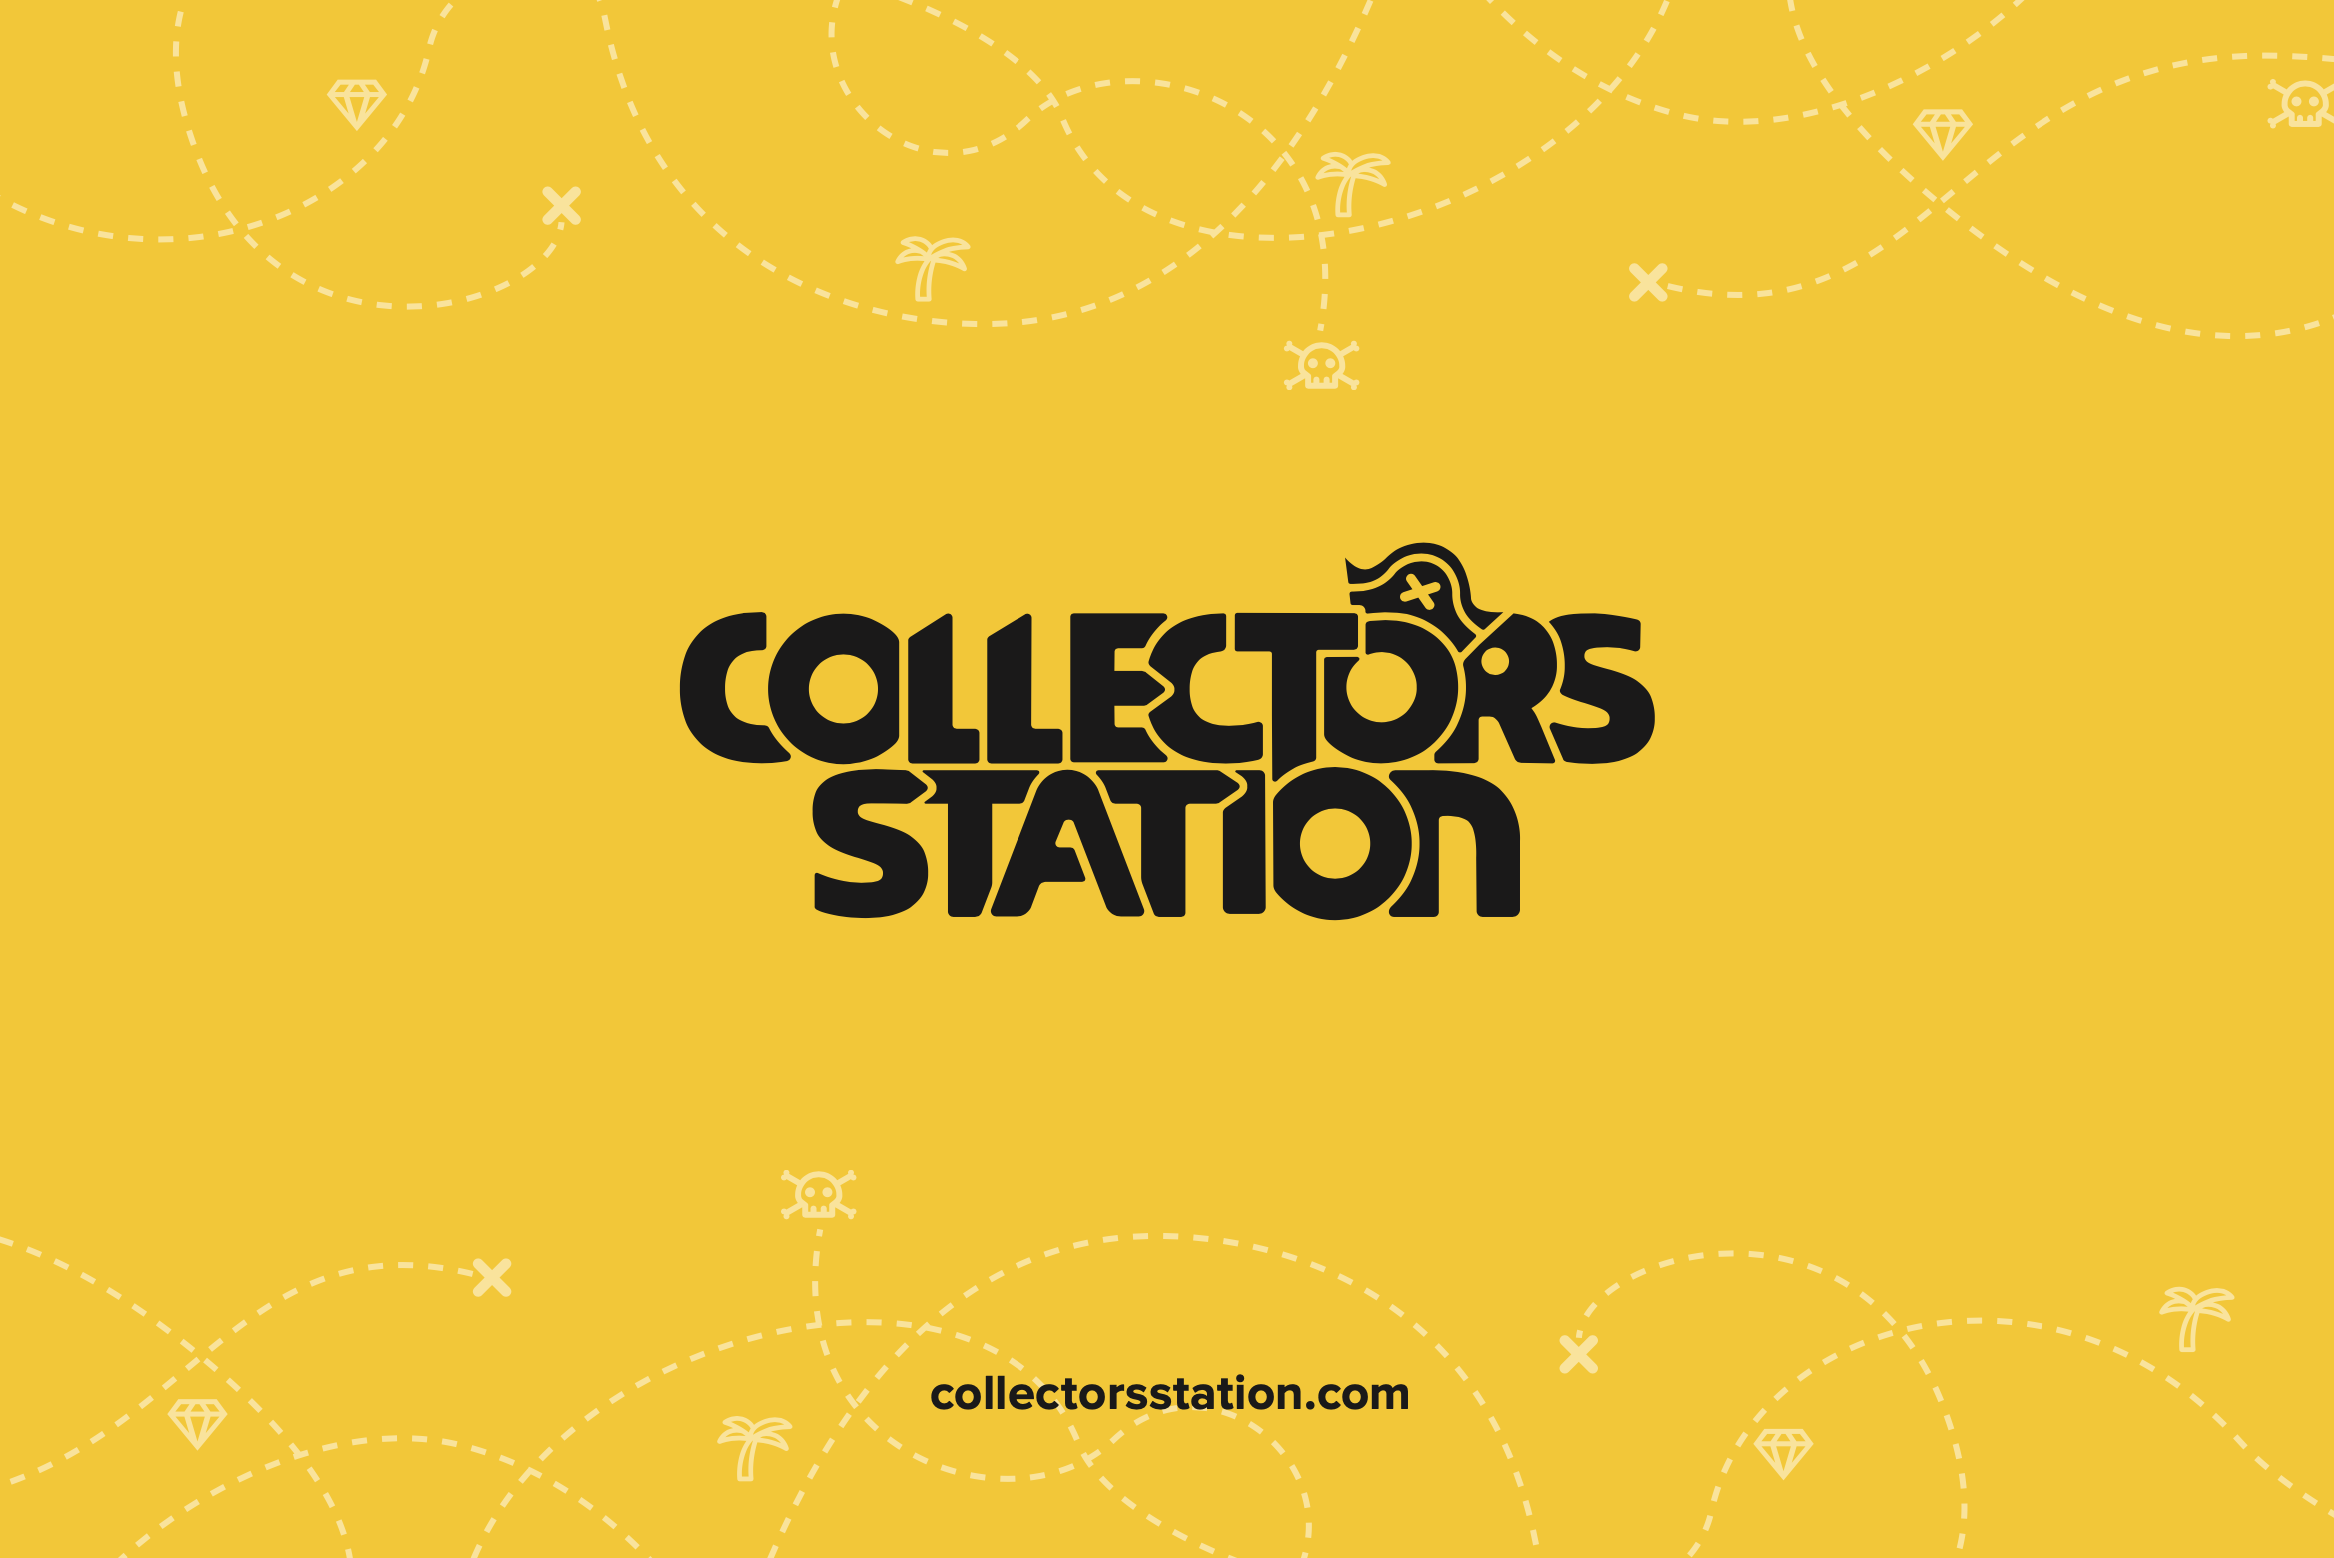 Collectors Station